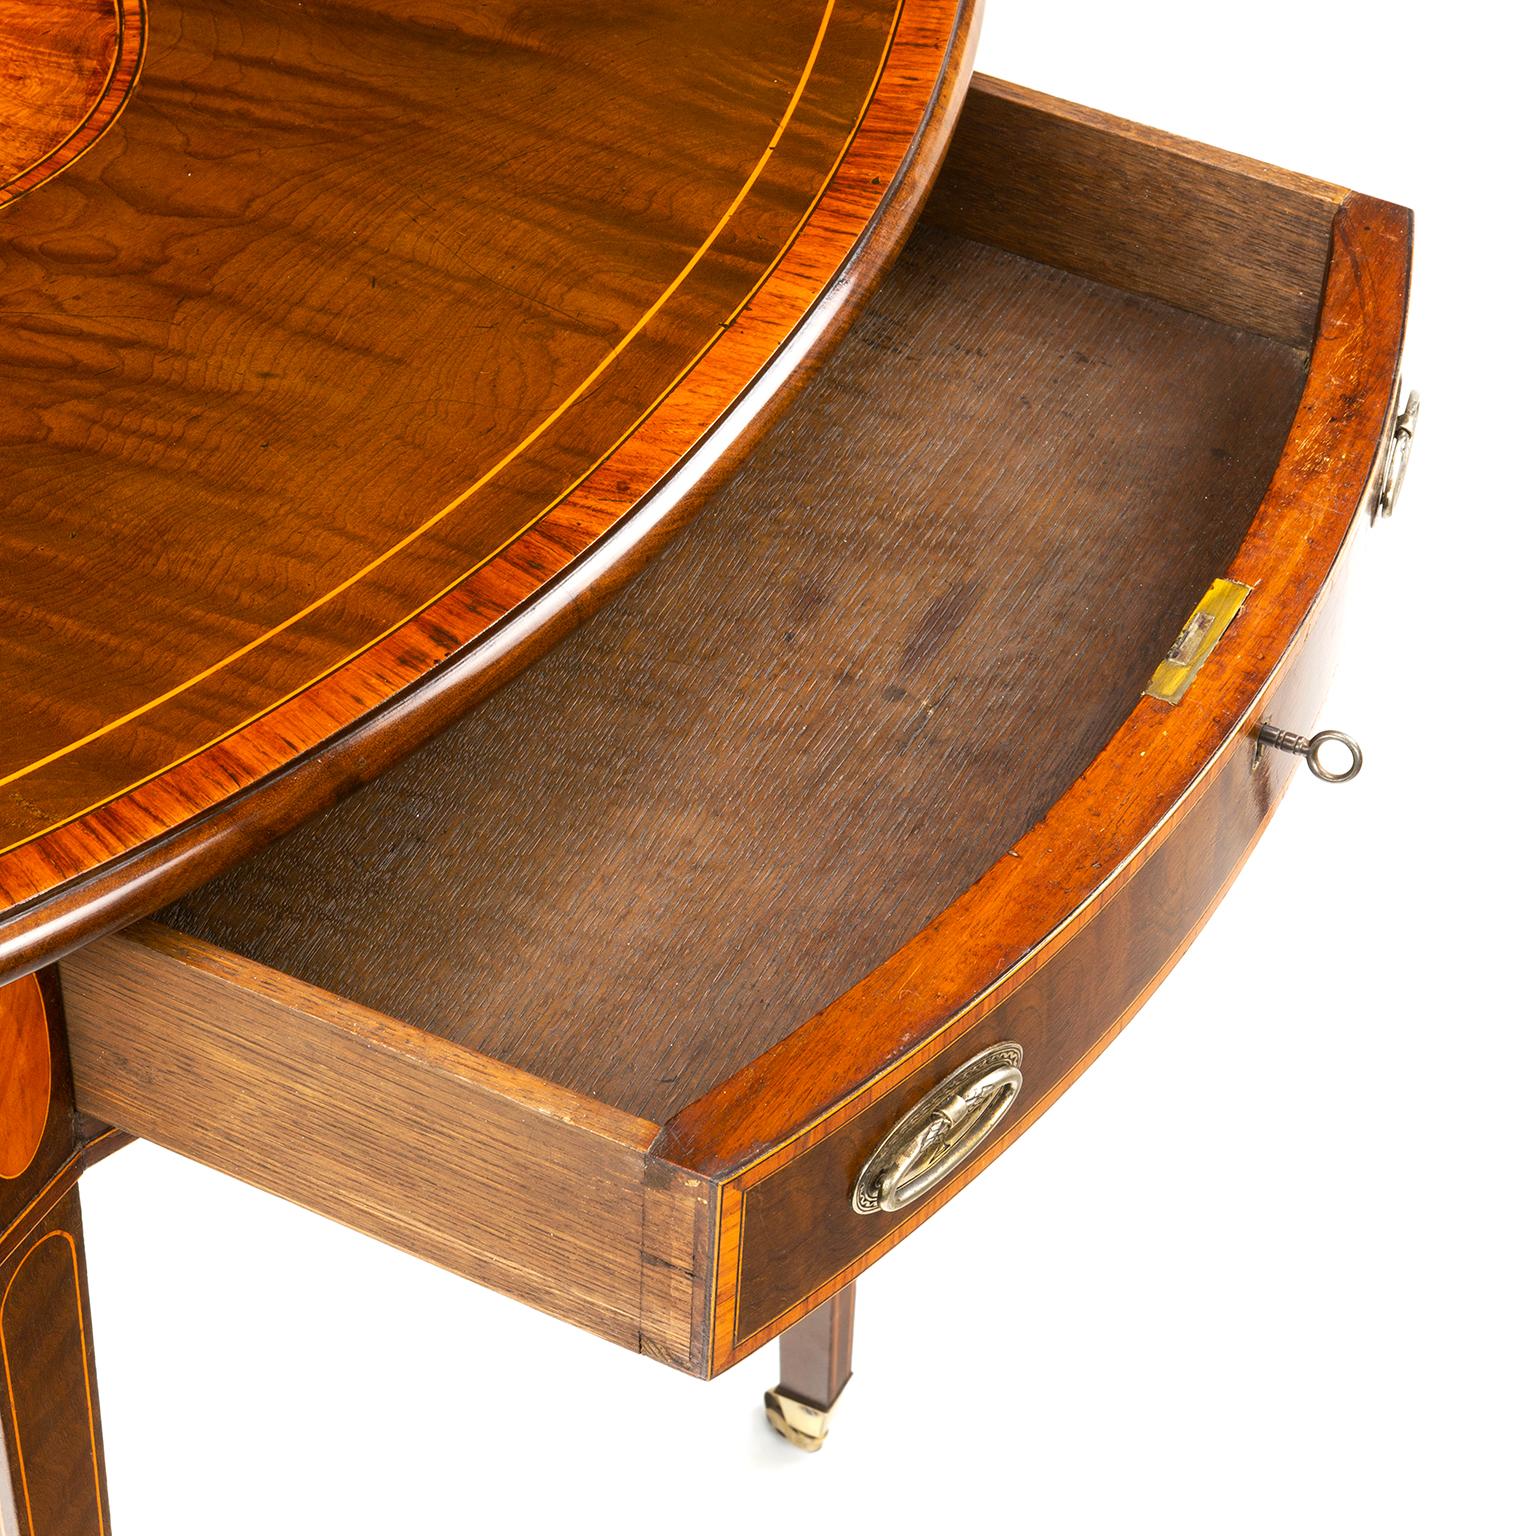 A George III Hepplewhite, inlaid sycamore veneered and inlaid oval Pembroke table, crossbanded in satinwood and tulipwood, bordered with boxwood and ebony lines, the hinged top with central oval burr walnut veneered panel, having a moulded edge,